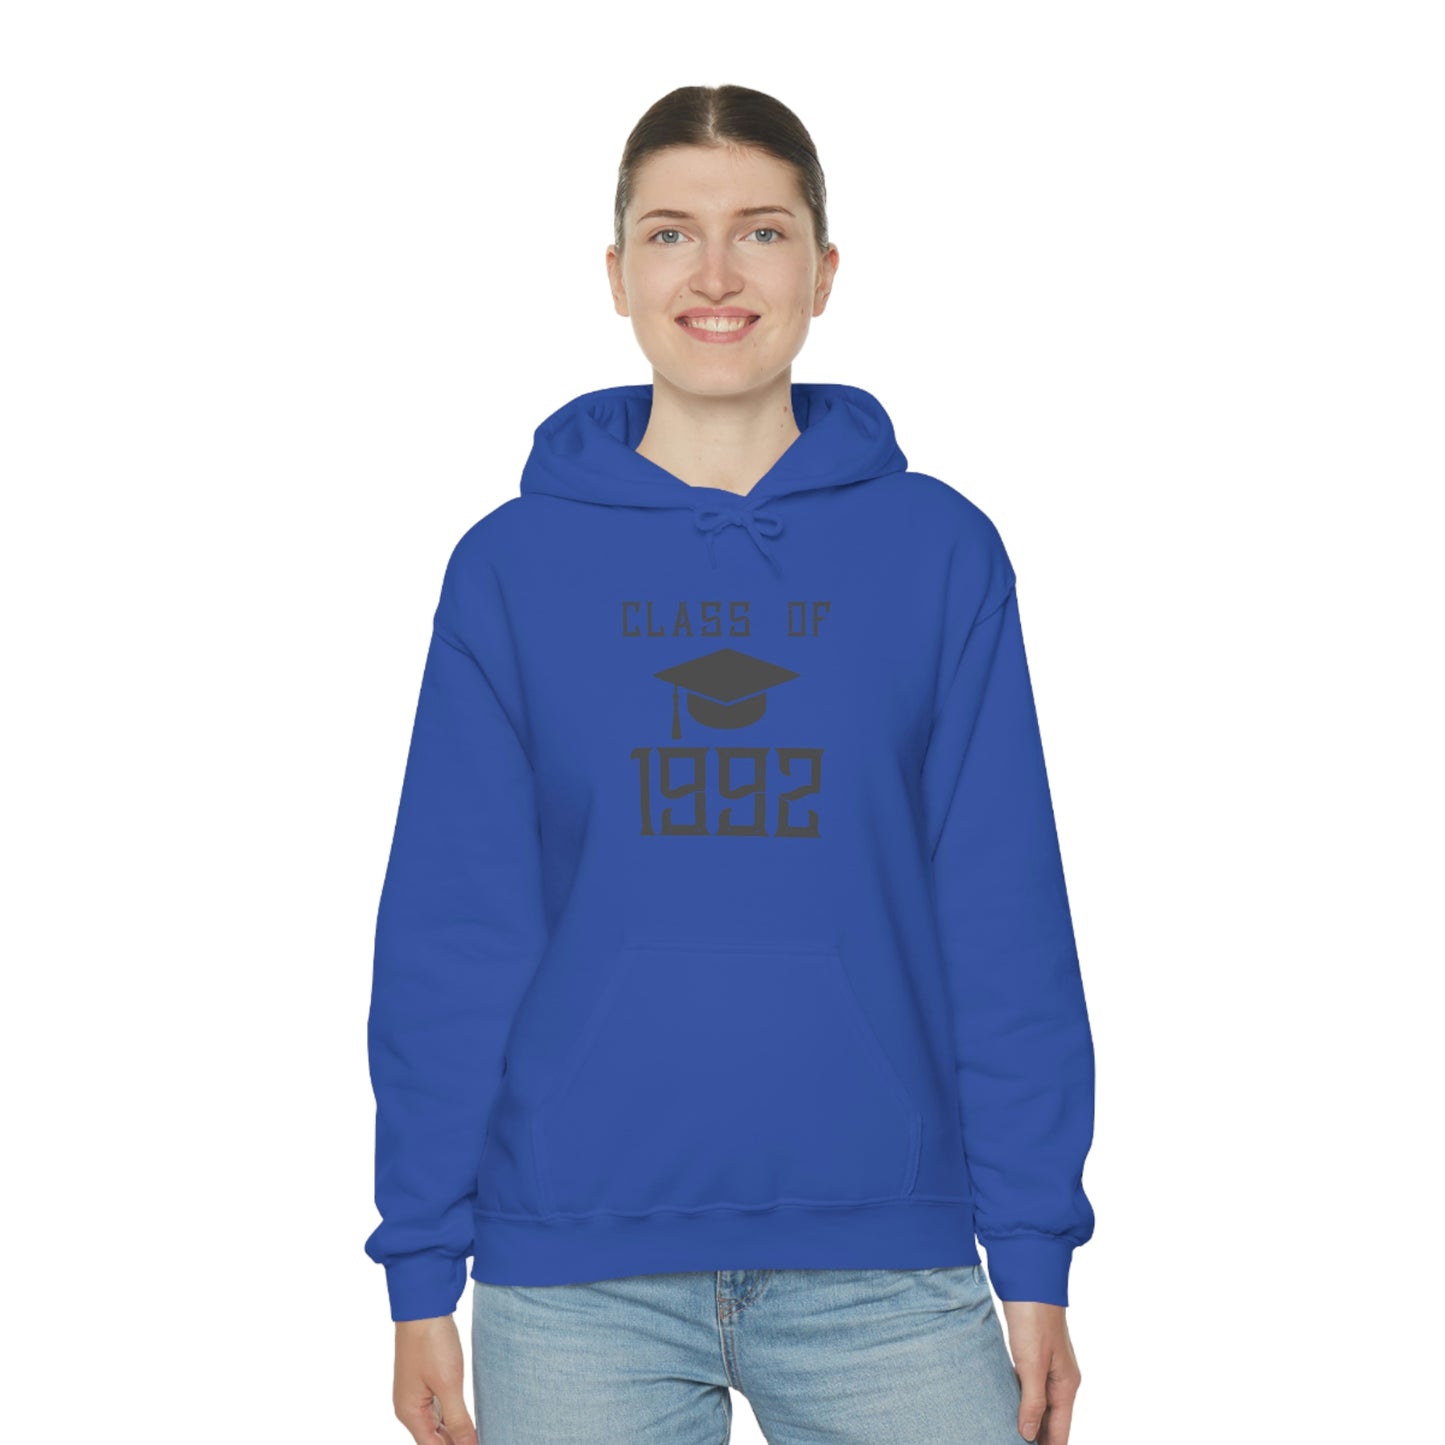 "Class Of 1992" Hoodie - Weave Got Gifts - Unique Gifts You Won’t Find Anywhere Else!